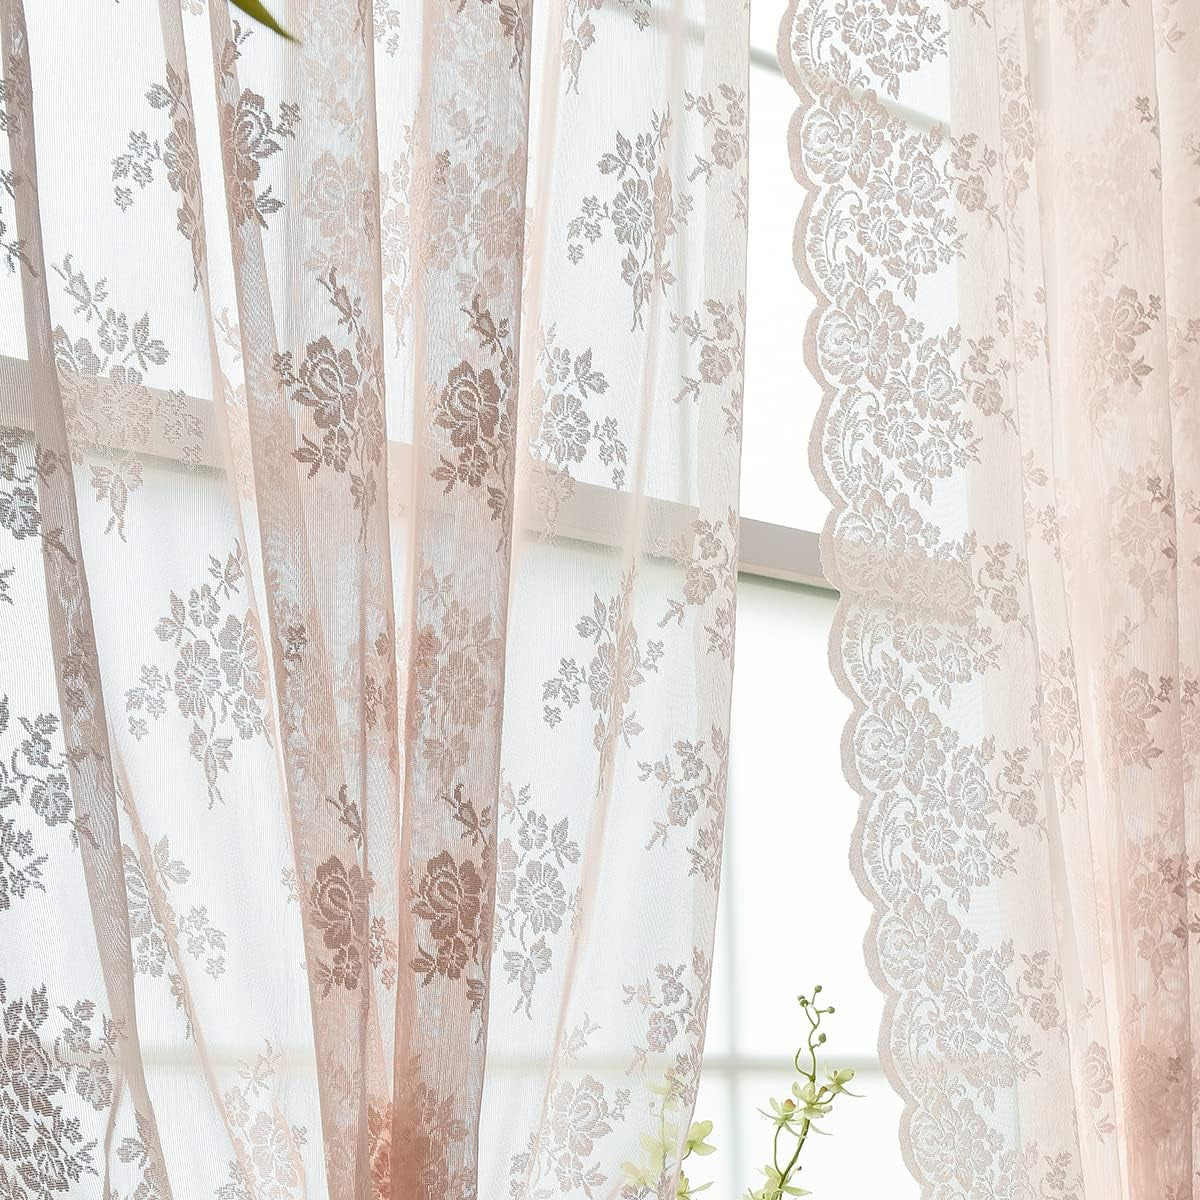 Kotile Sage Green Sheer Valance Curtain for Windows, Rustic Floral Spring Sheer Window Valance Curtain 18 Inch Length, Light Filtering Rod Pocket Lace Valance, 52 X 18 Inch, 1 Panel, Sage Green  Kotile Textile Blush Pink 52 In X 84 In Grommet 